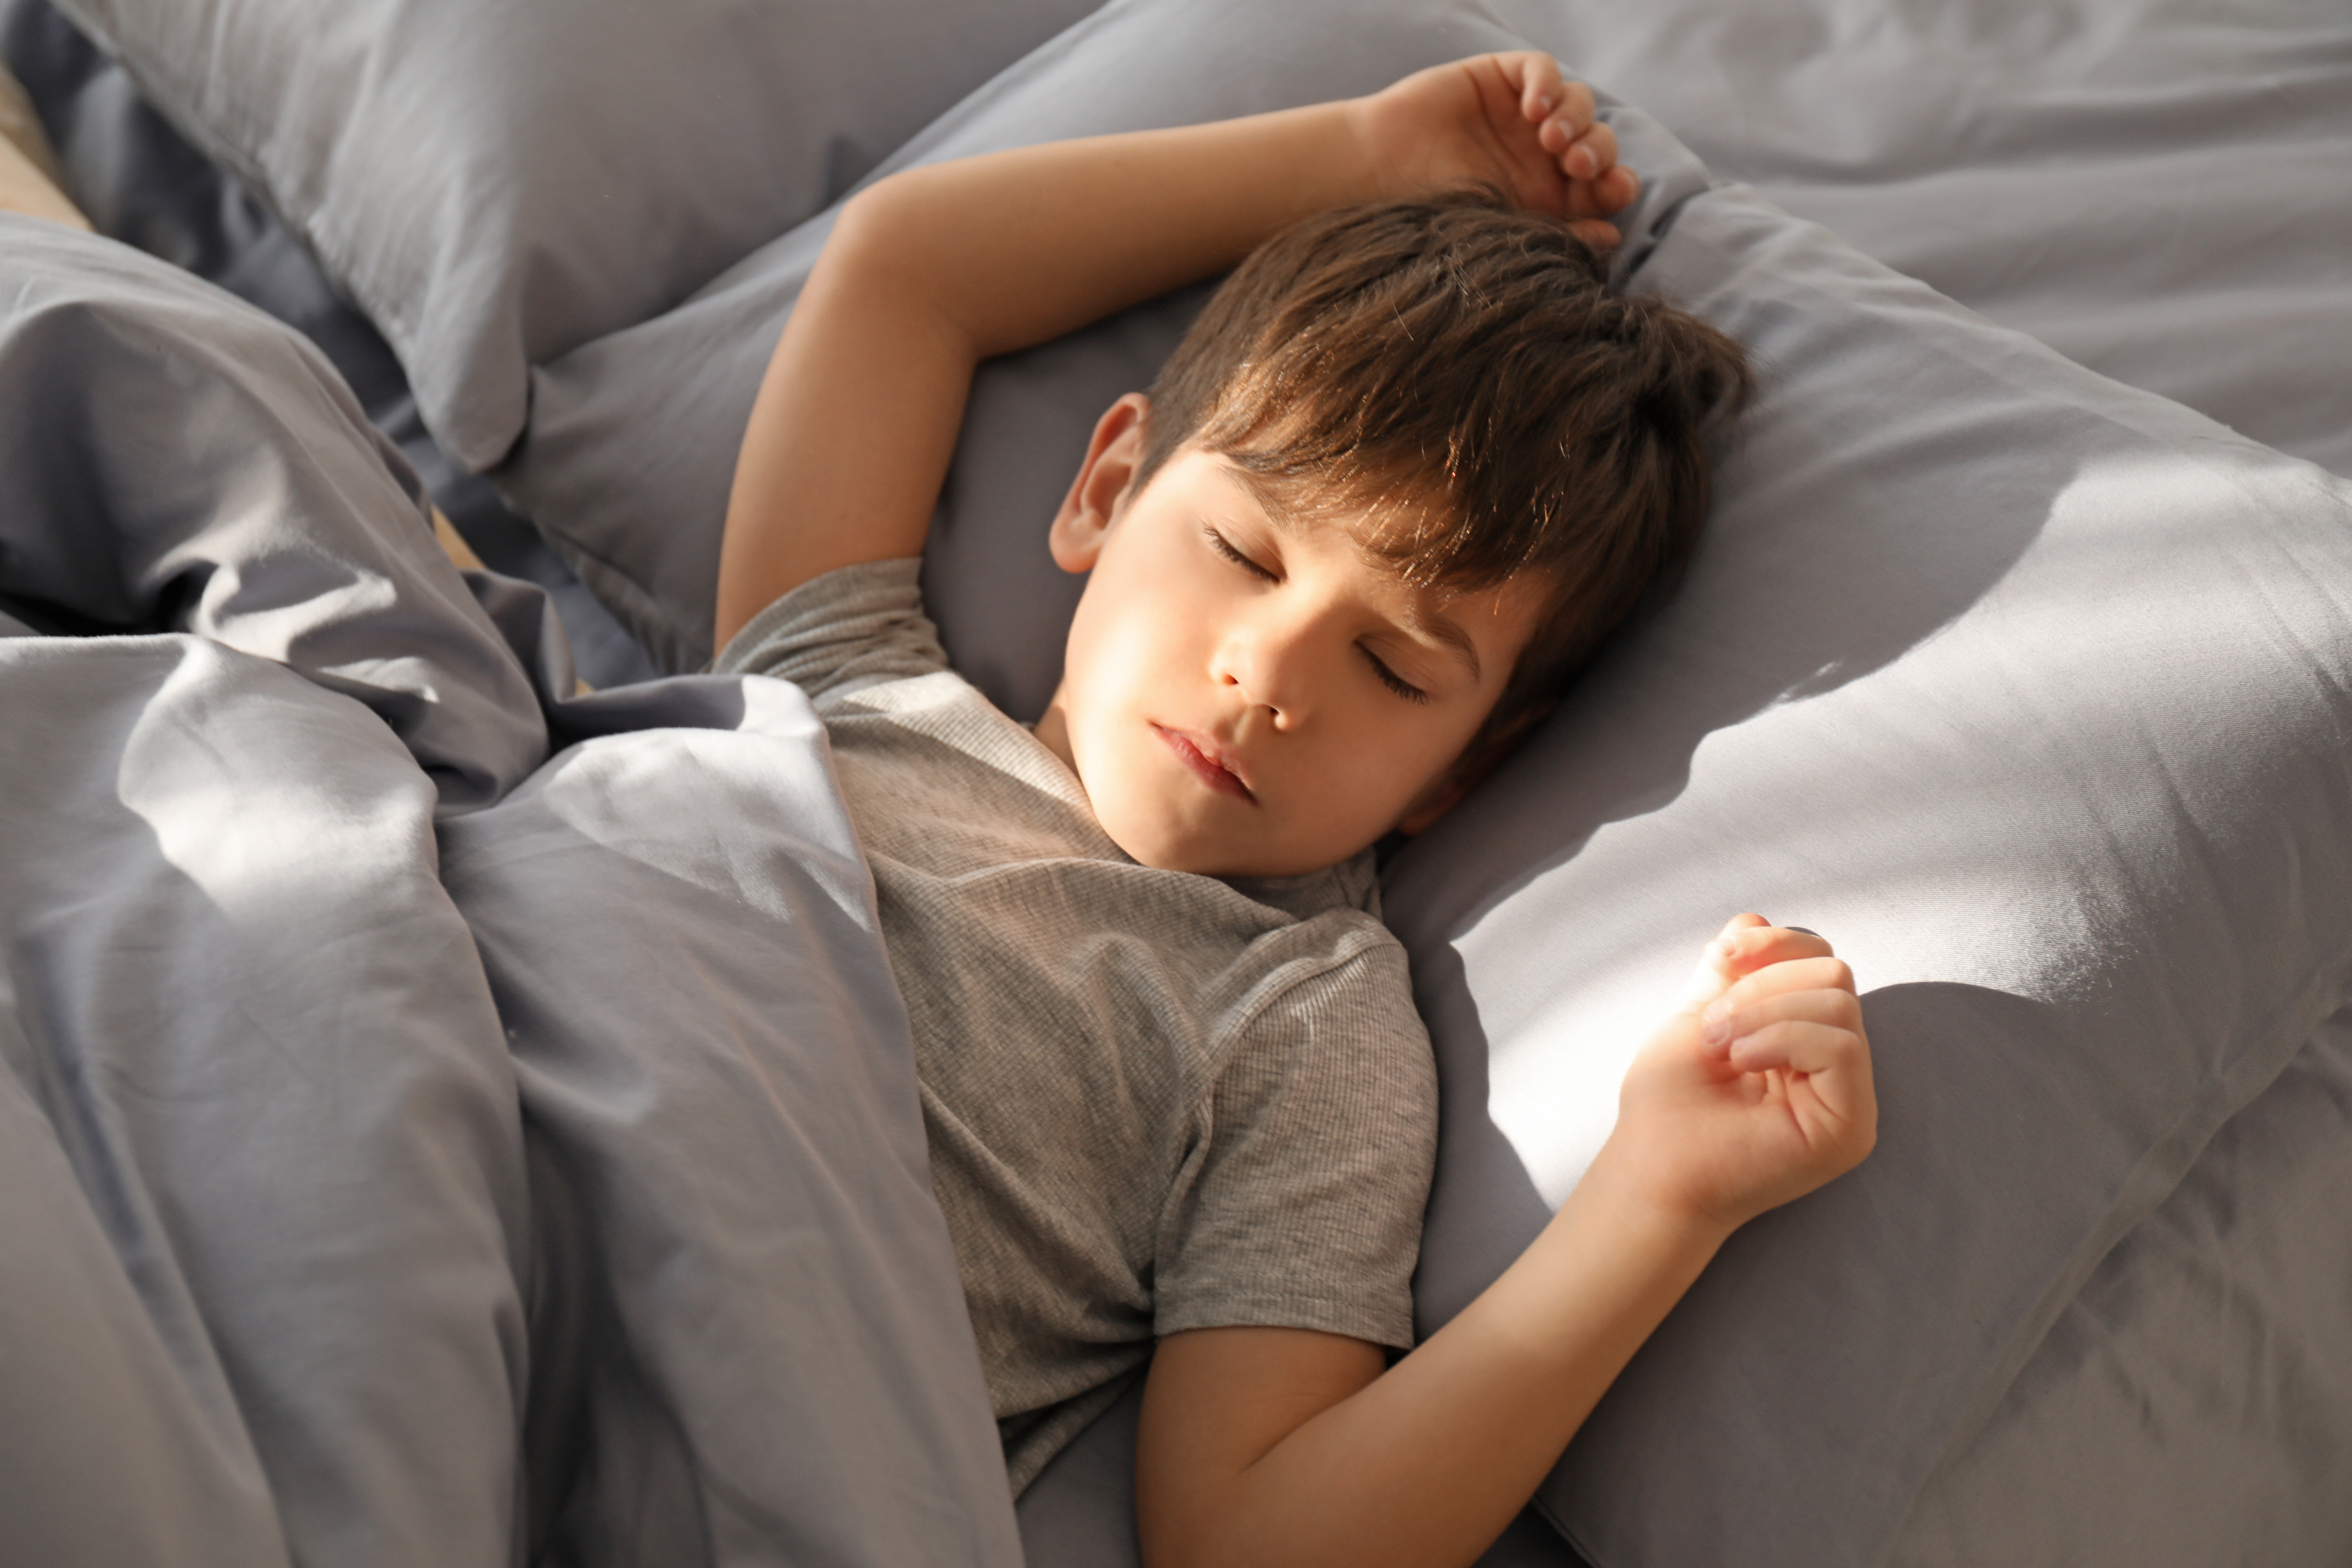 10 Year old Can't Relax and Sleep - Meltdowns from Noise, Lights